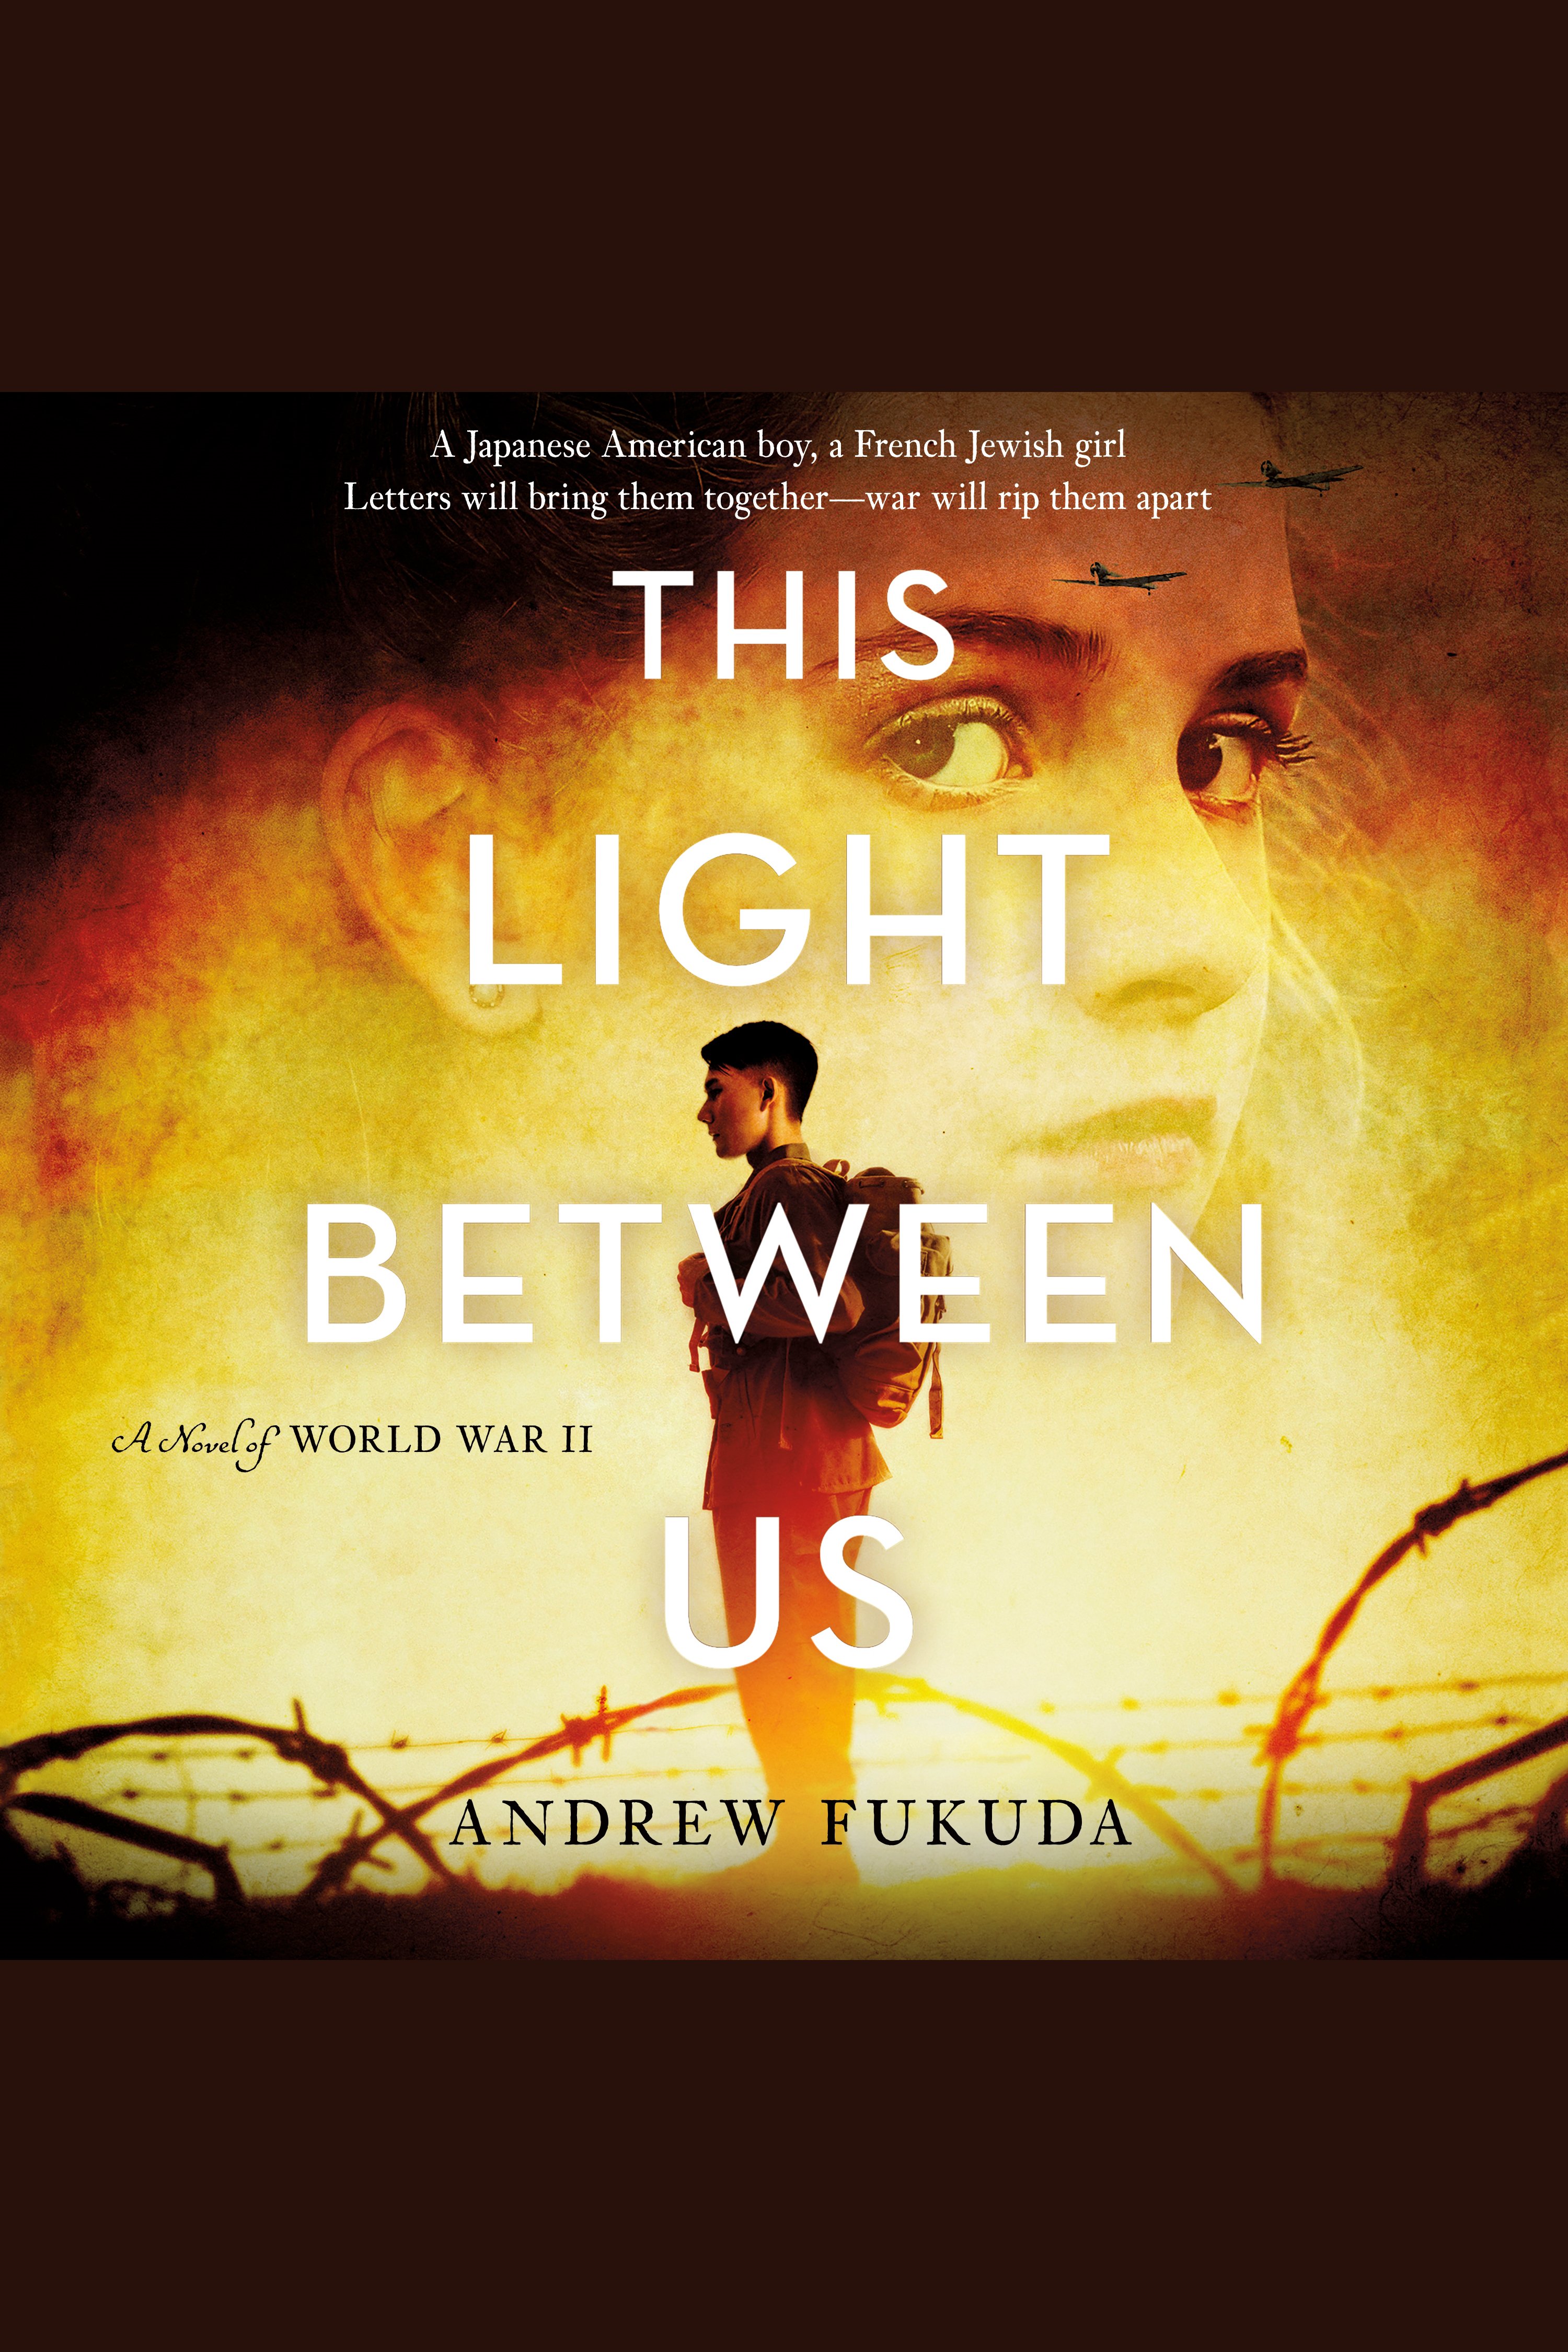 This Light Between Us A Novel of World War II cover image